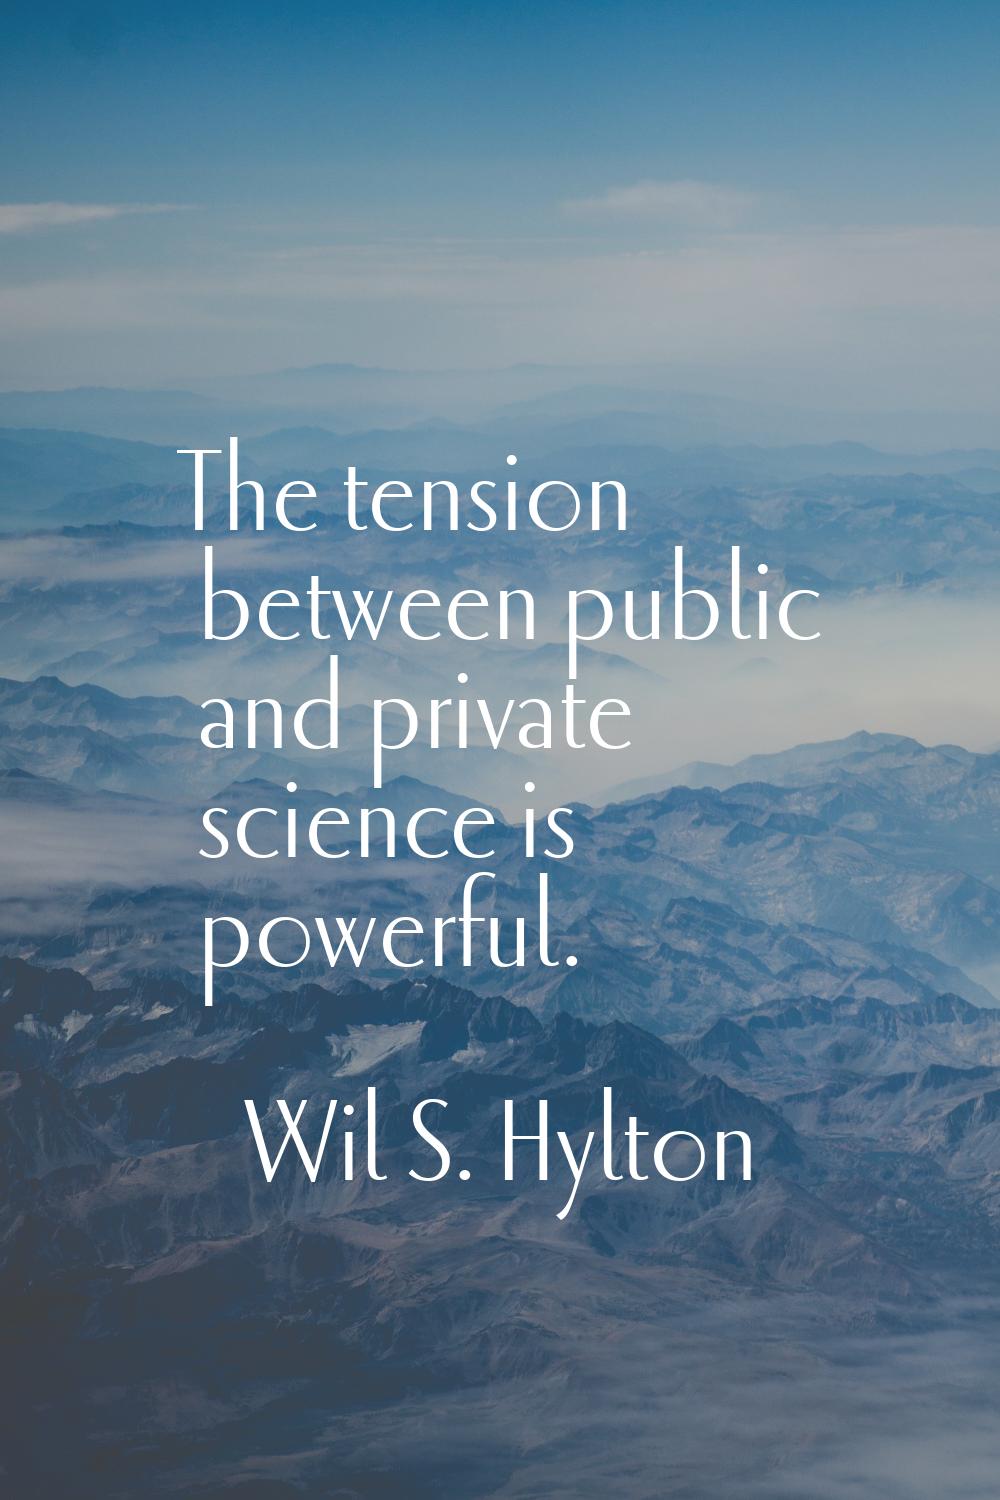 The tension between public and private science is powerful.